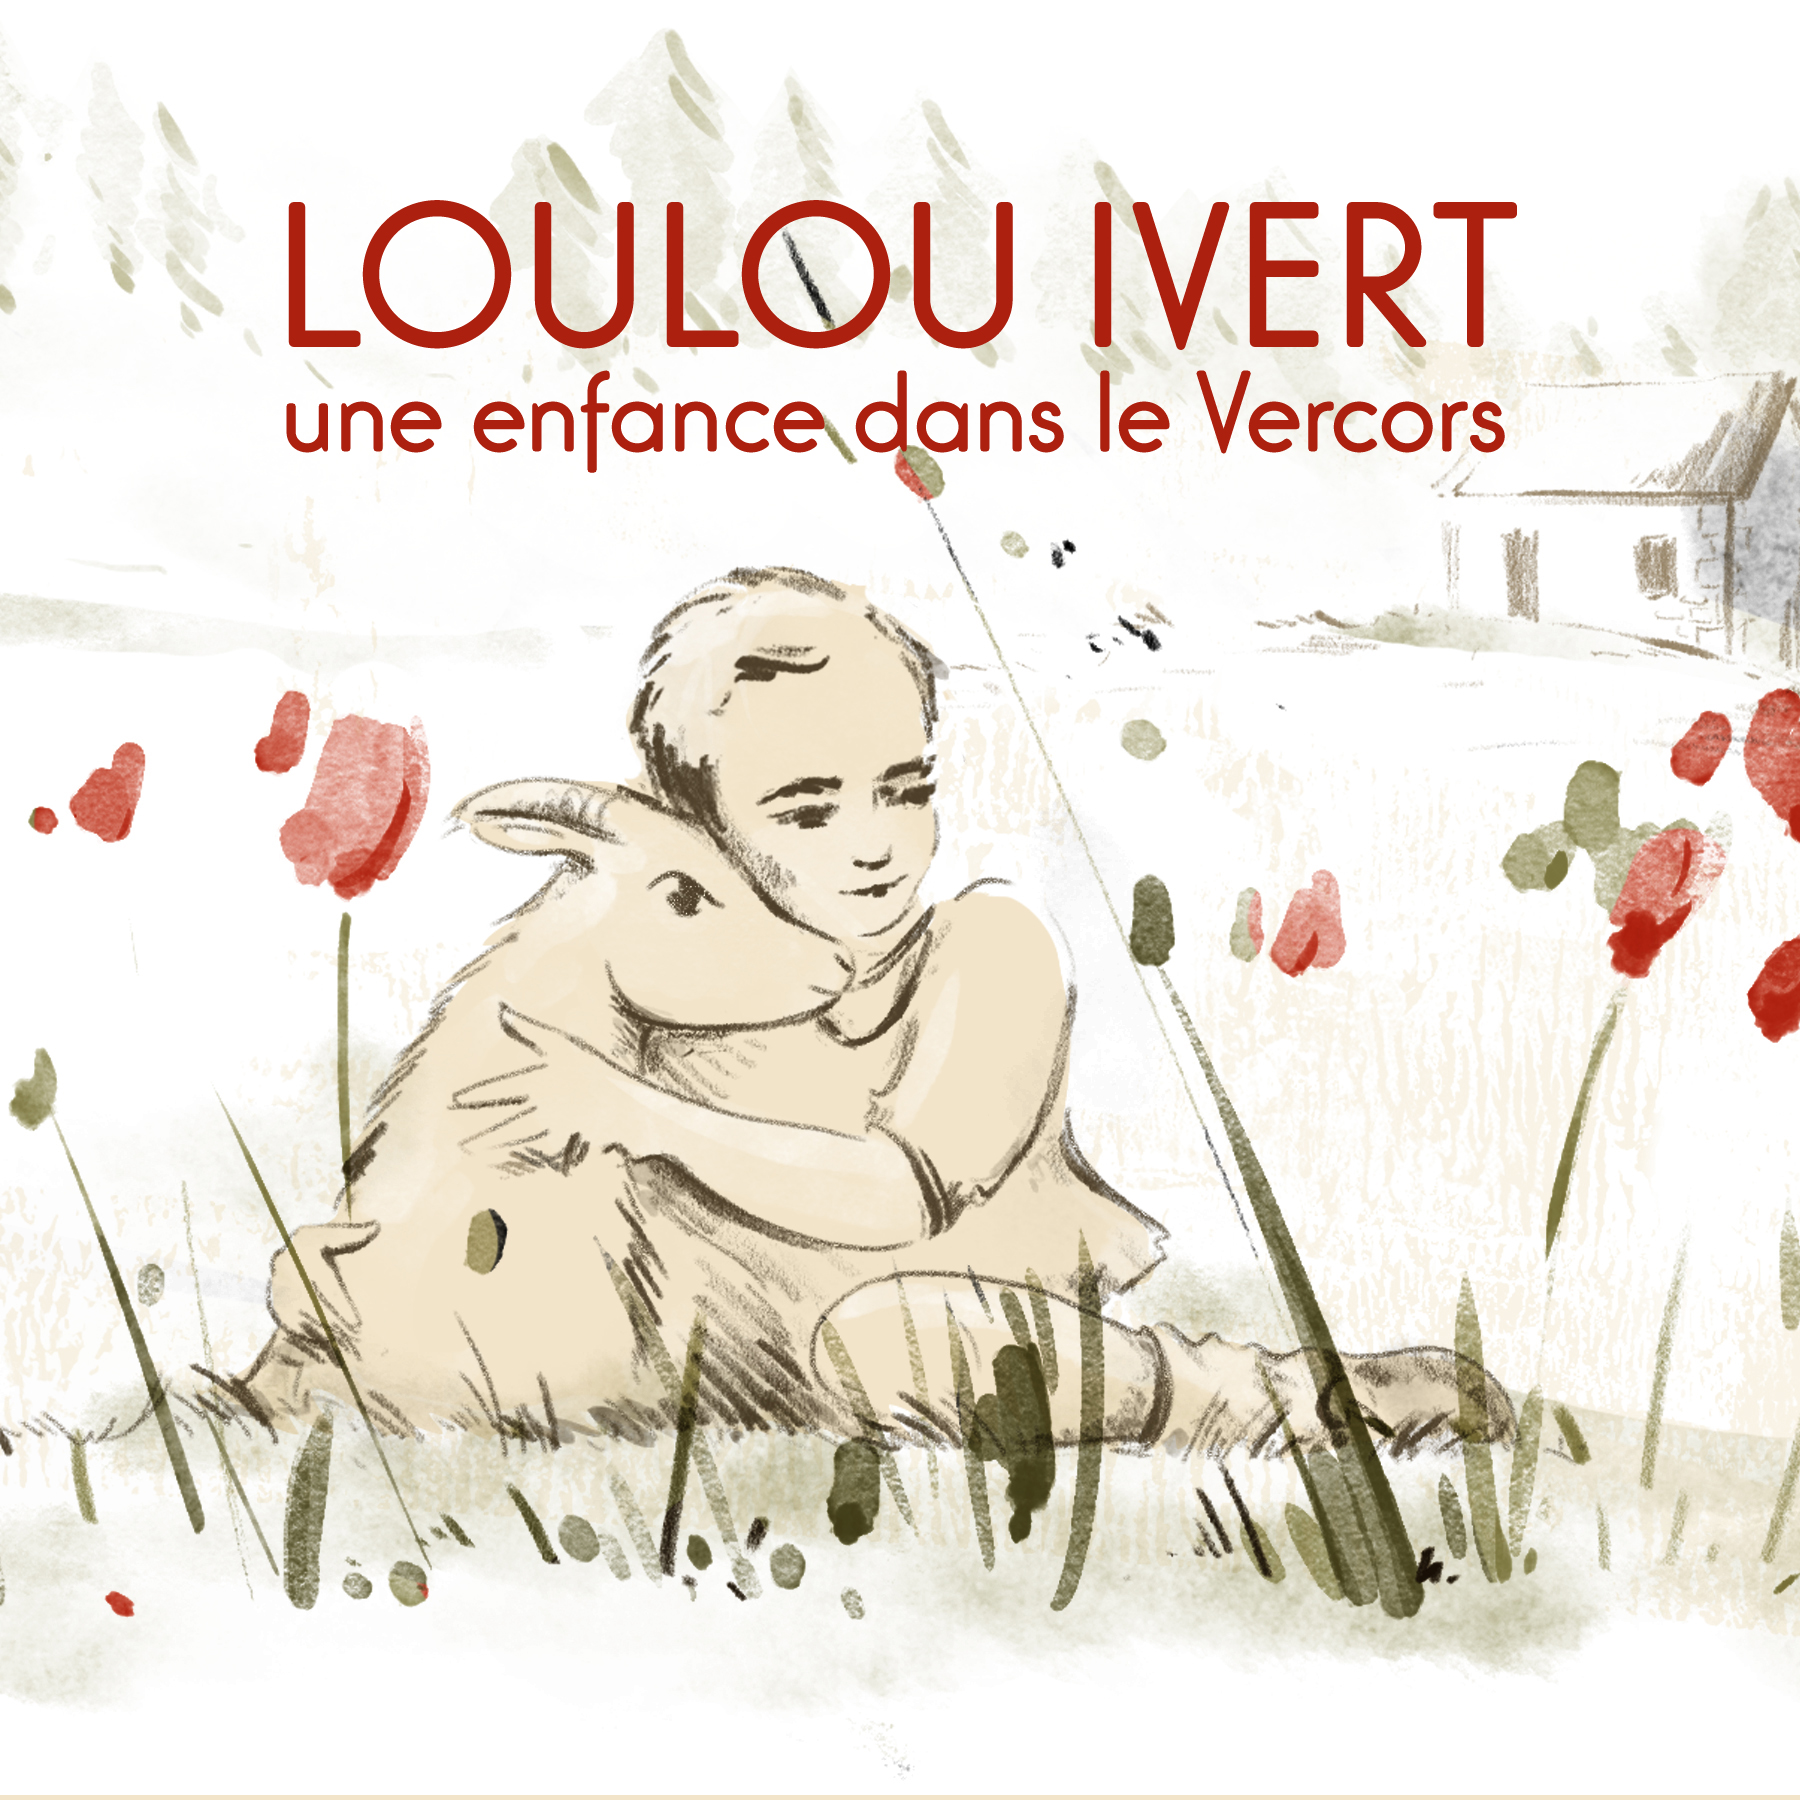 Loulou Ivert